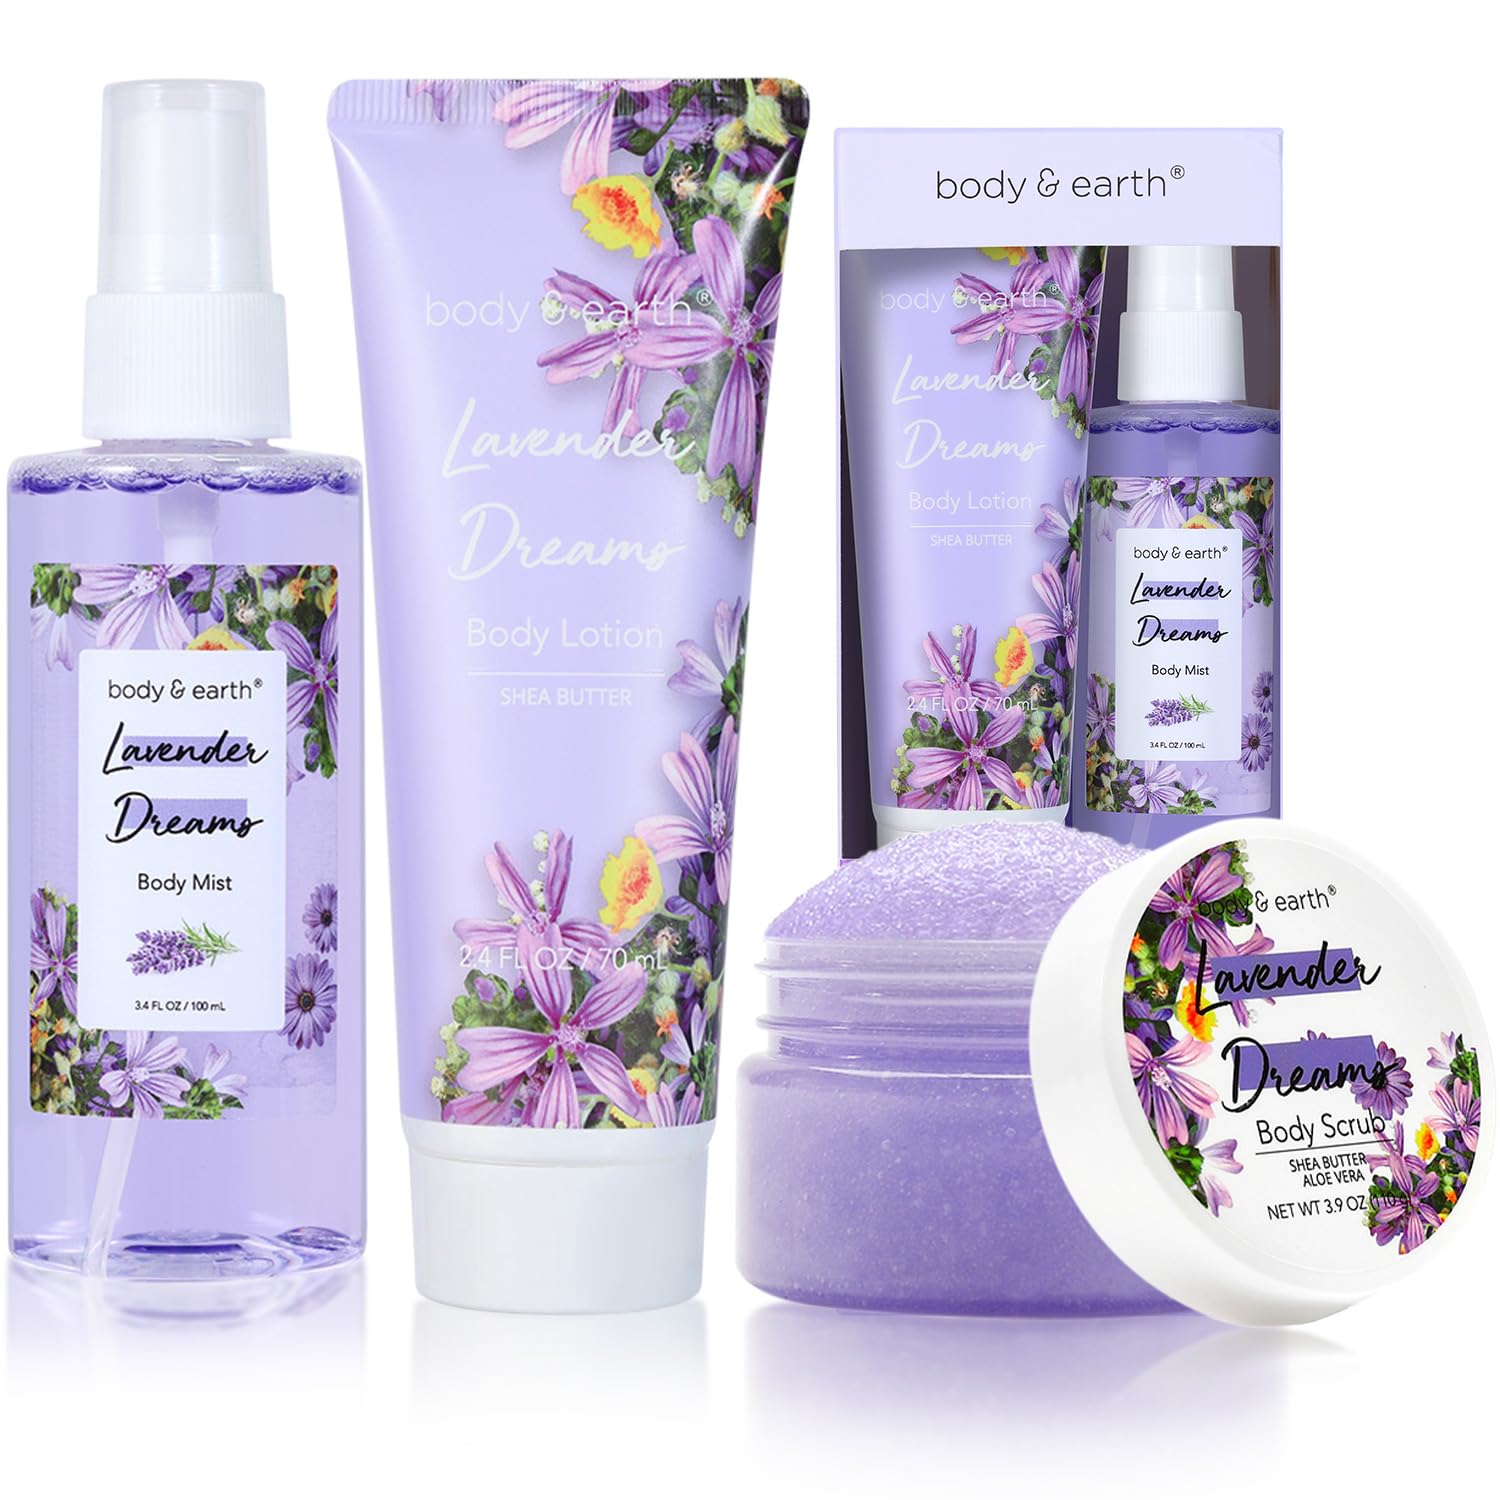 Body & Earth Body Mist Gift Set - Gift Sets for Women, Perfume, Body Lotion, and Body Scrub in a Lavender Dreams Box- Perfect Birthday Gifts for Moms, and Special Occasions,Unique Gift Ideas for Her